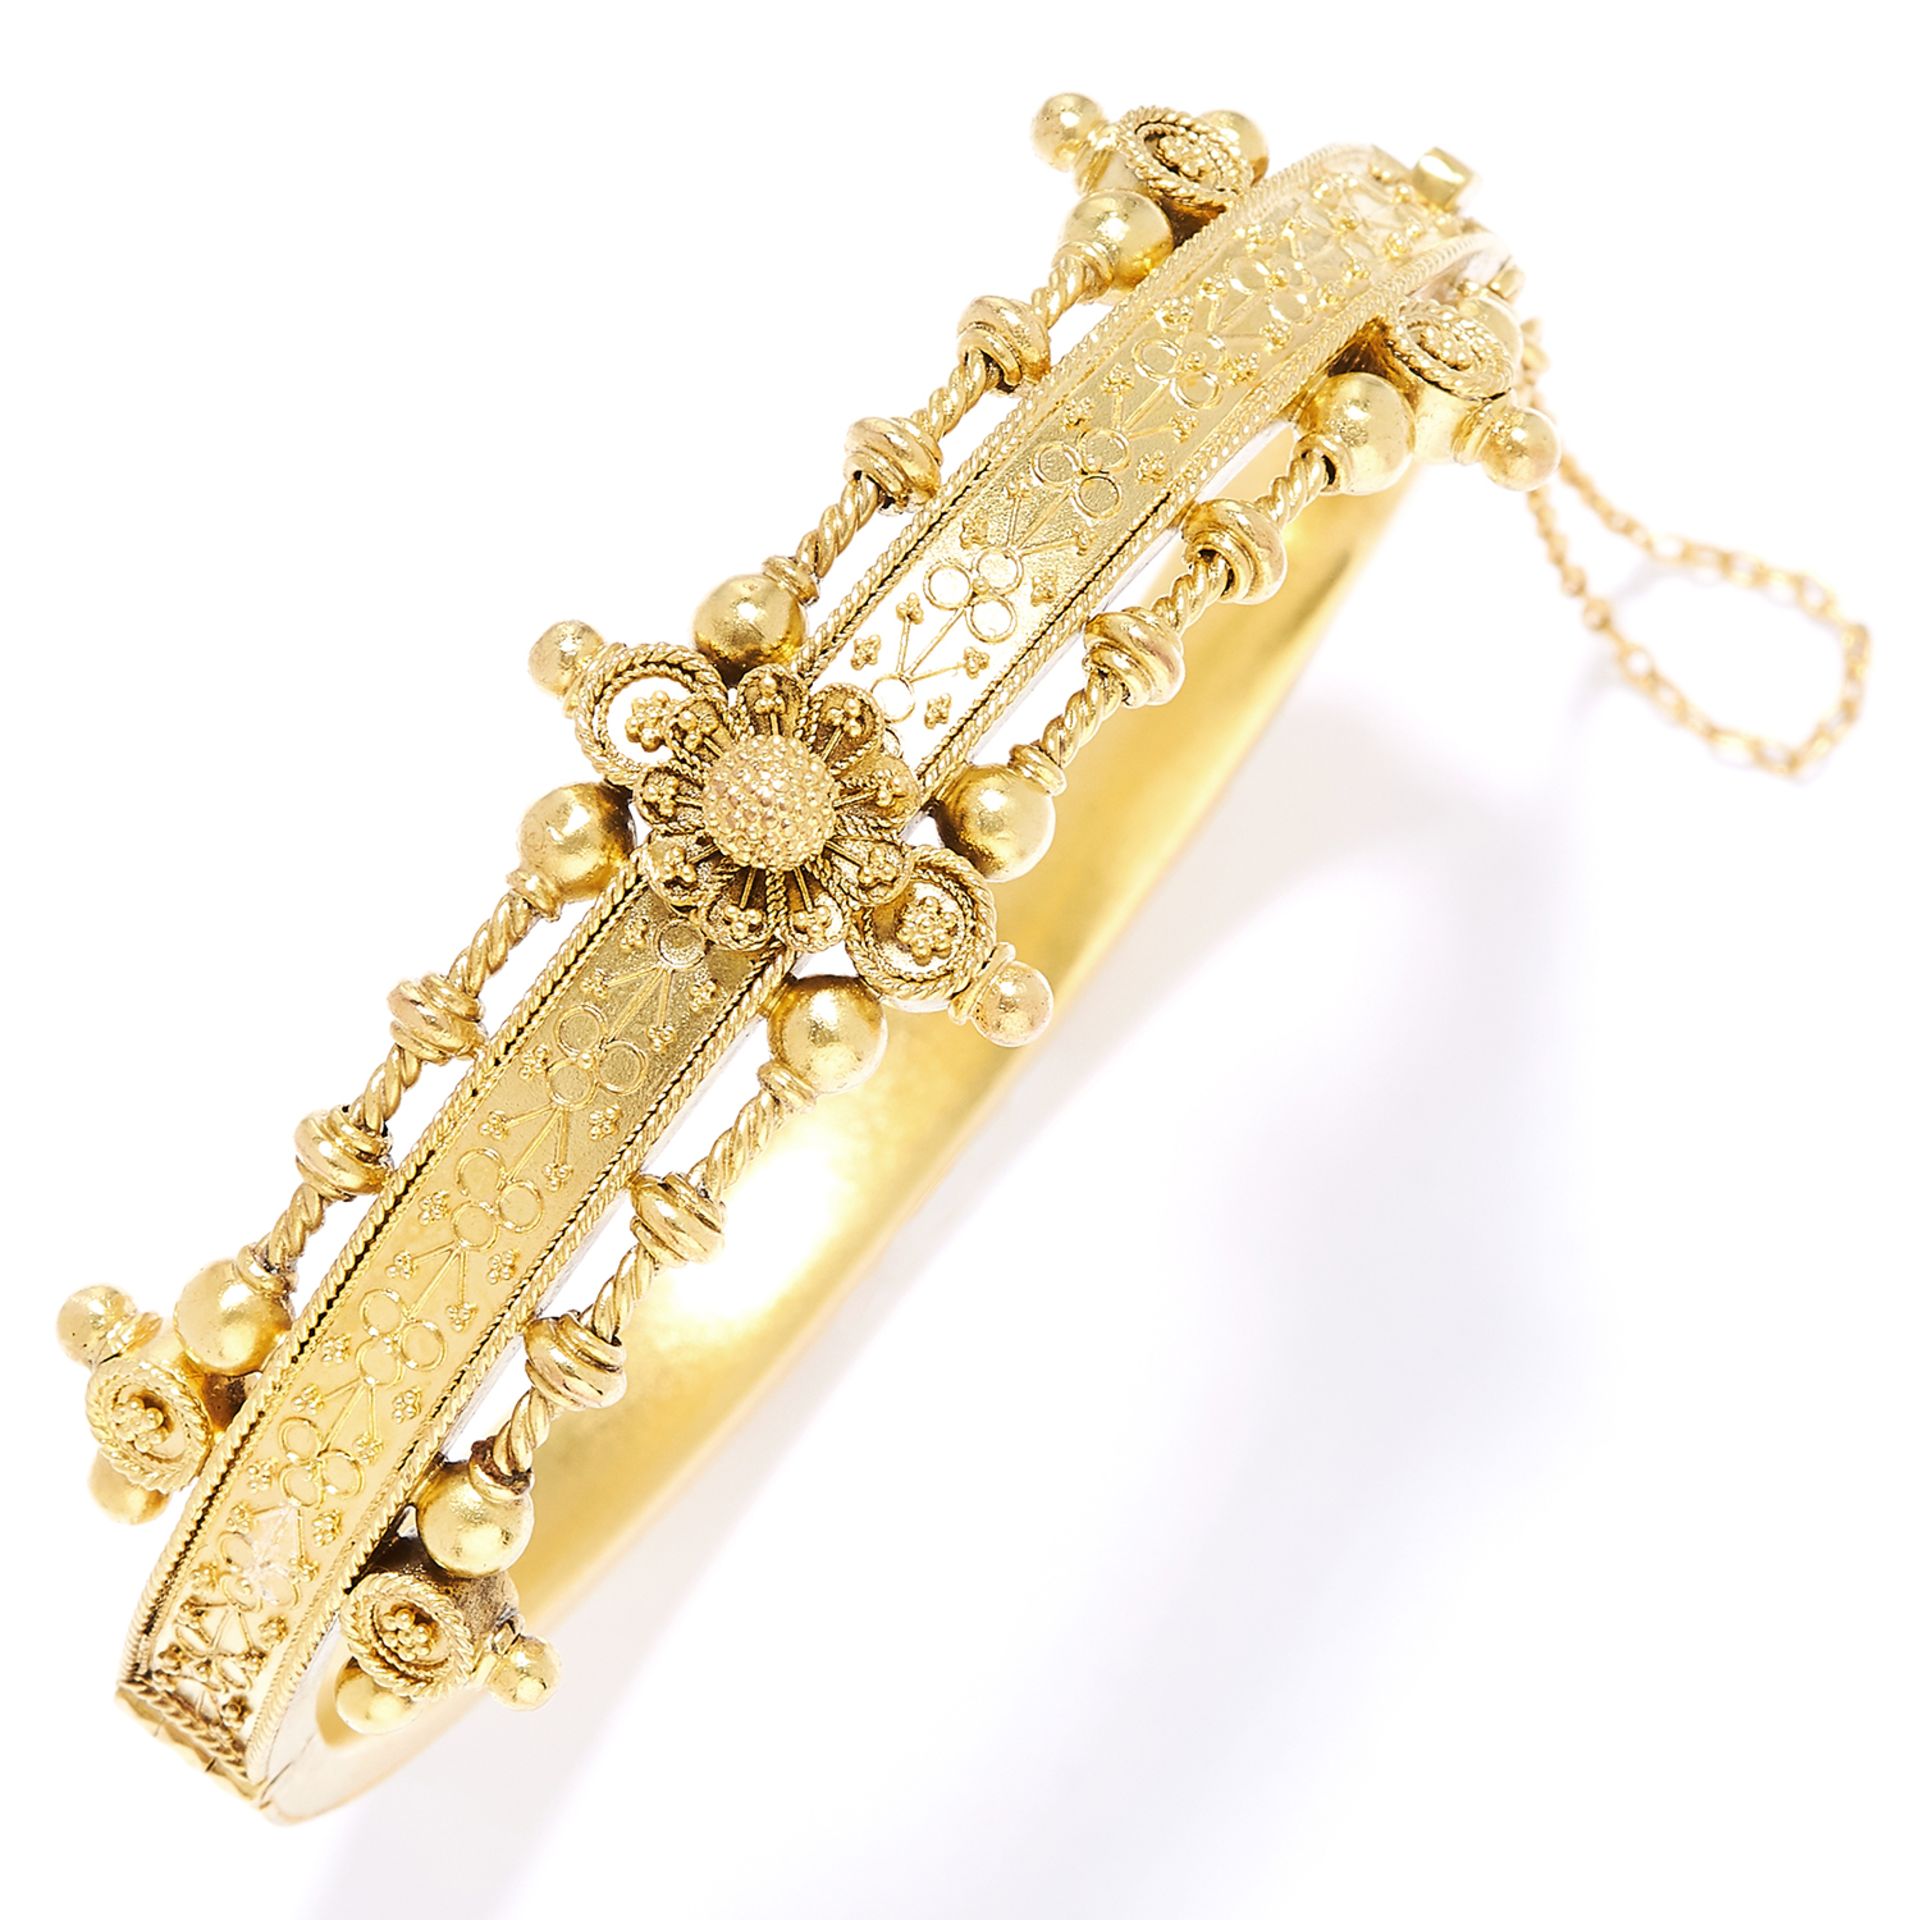 ANTIQUE BANGLE, 19TH CENTURY in high carat yellow gold decorated with bead and ropework designs,